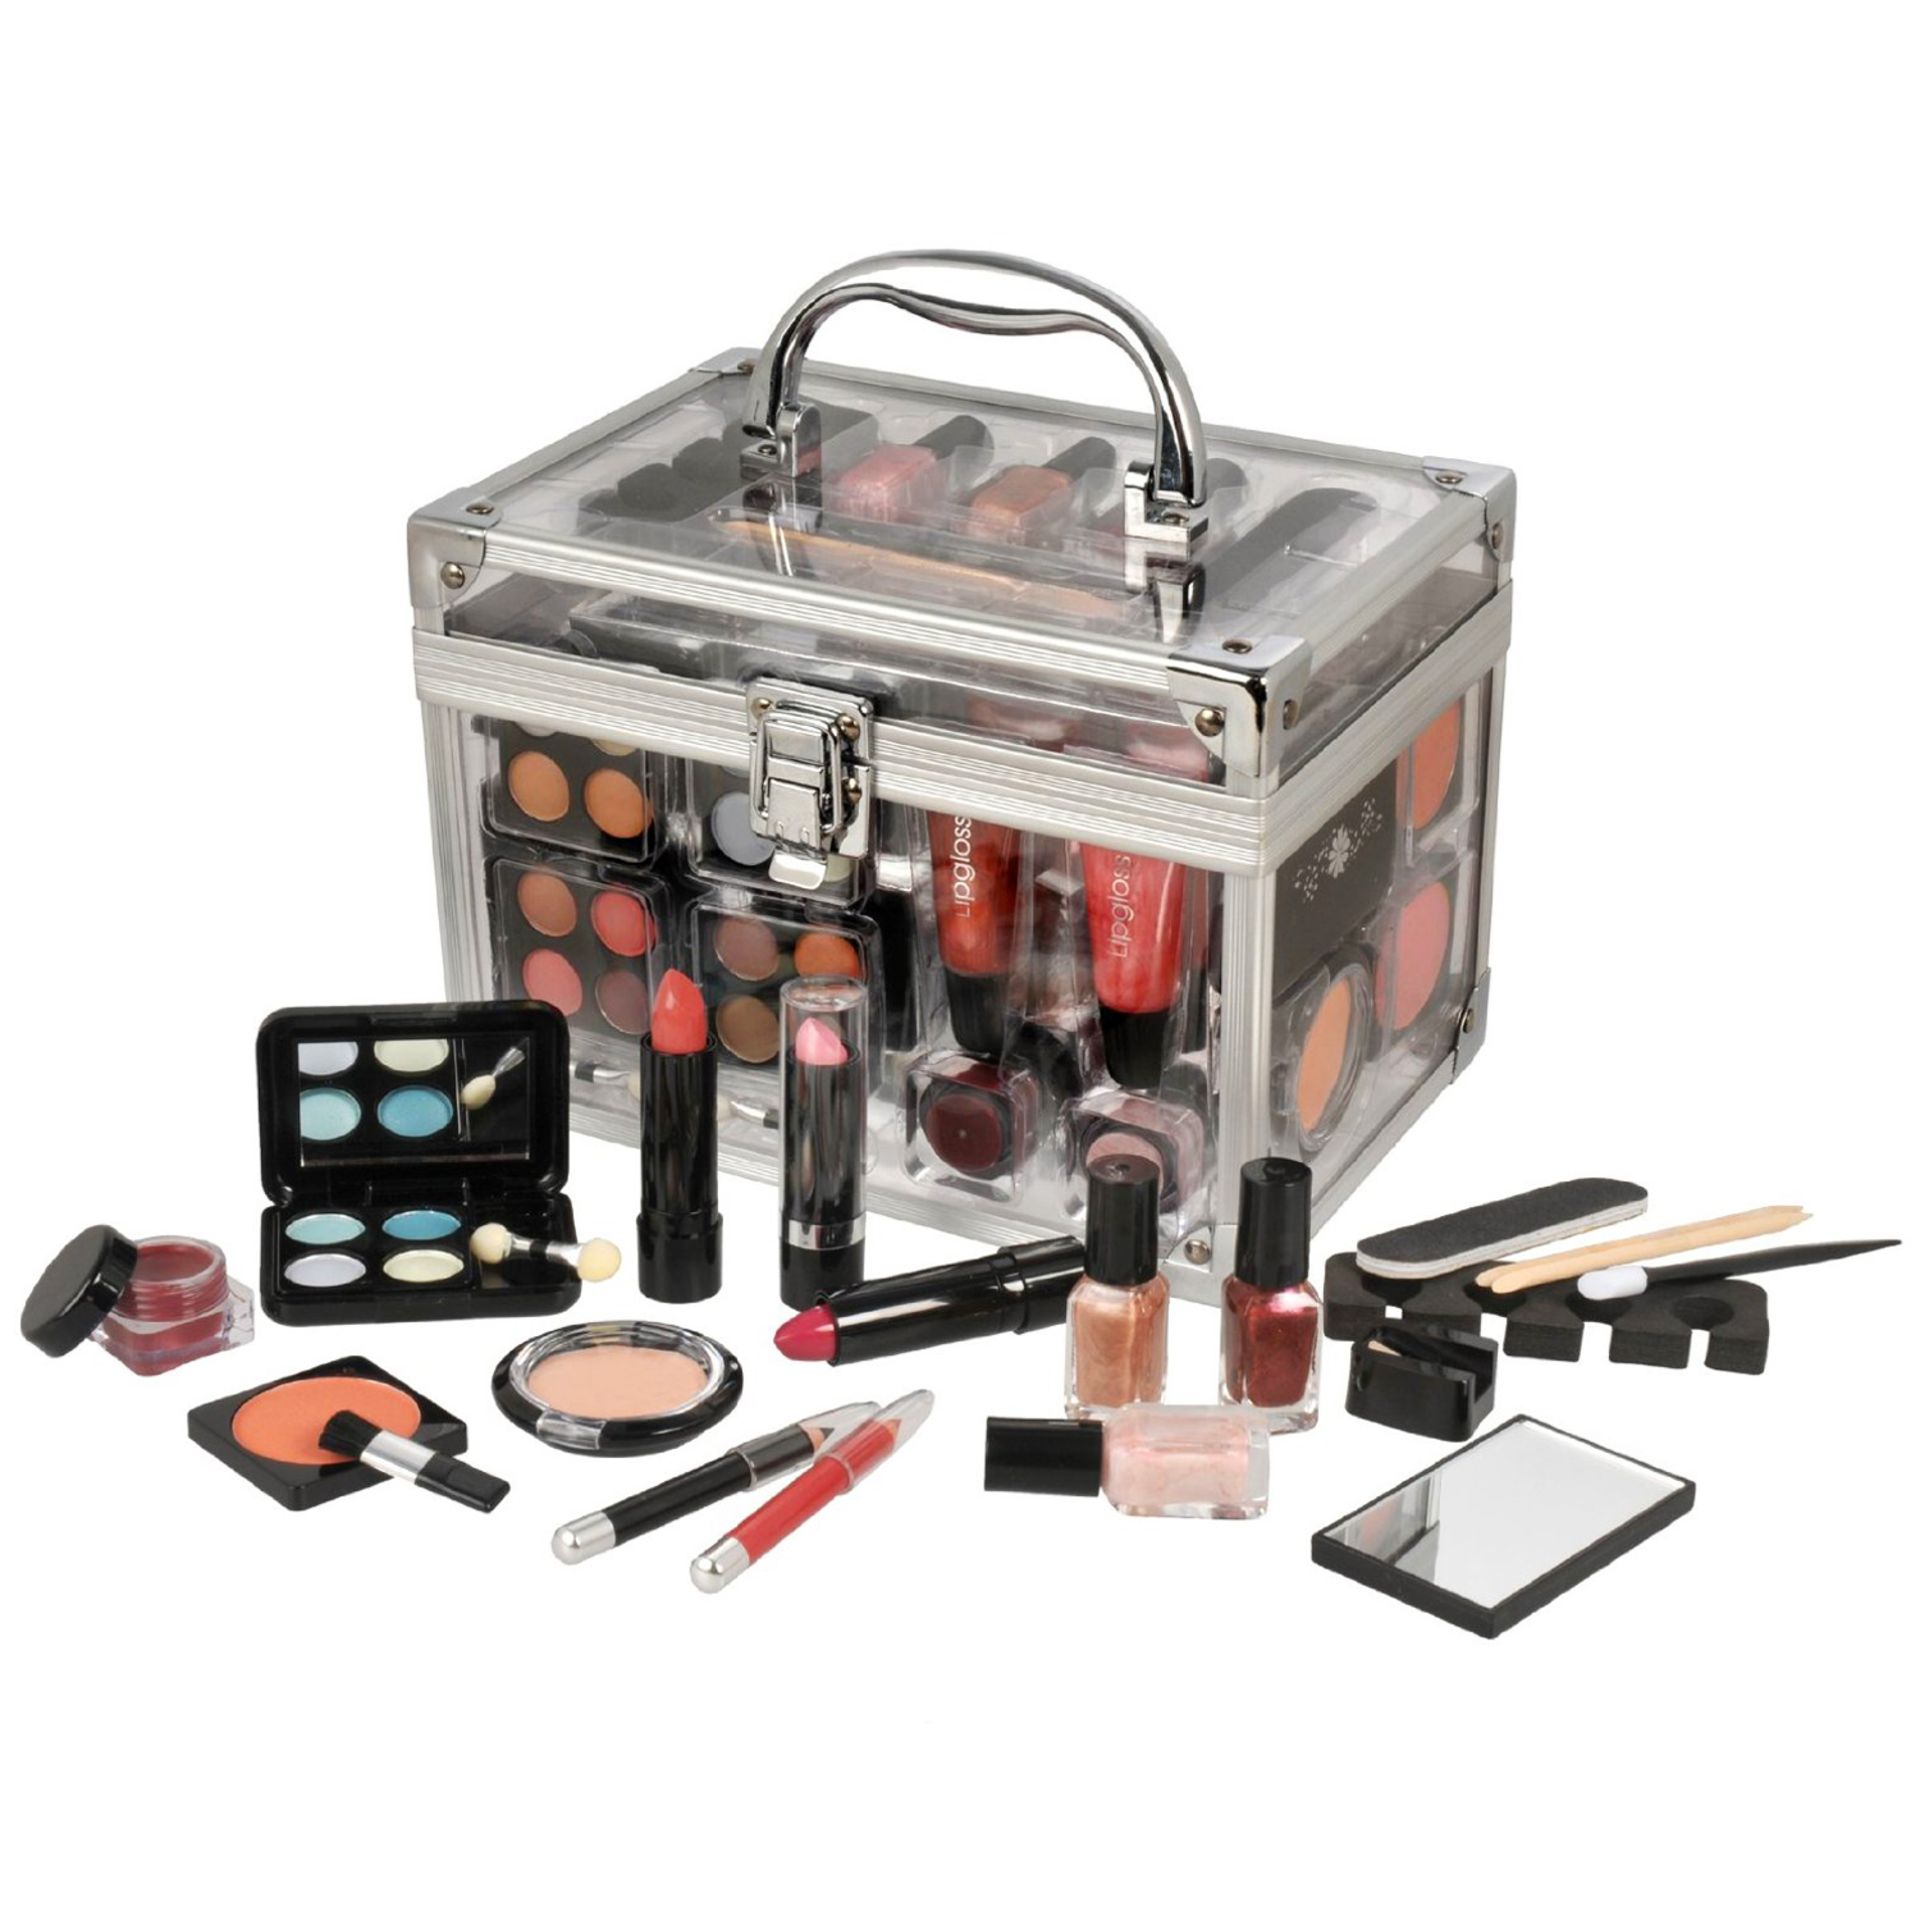 V Brand New Ladies 42 Piece Cosmetic Set In Aluminium/Clear Travel Case RRP £29.95